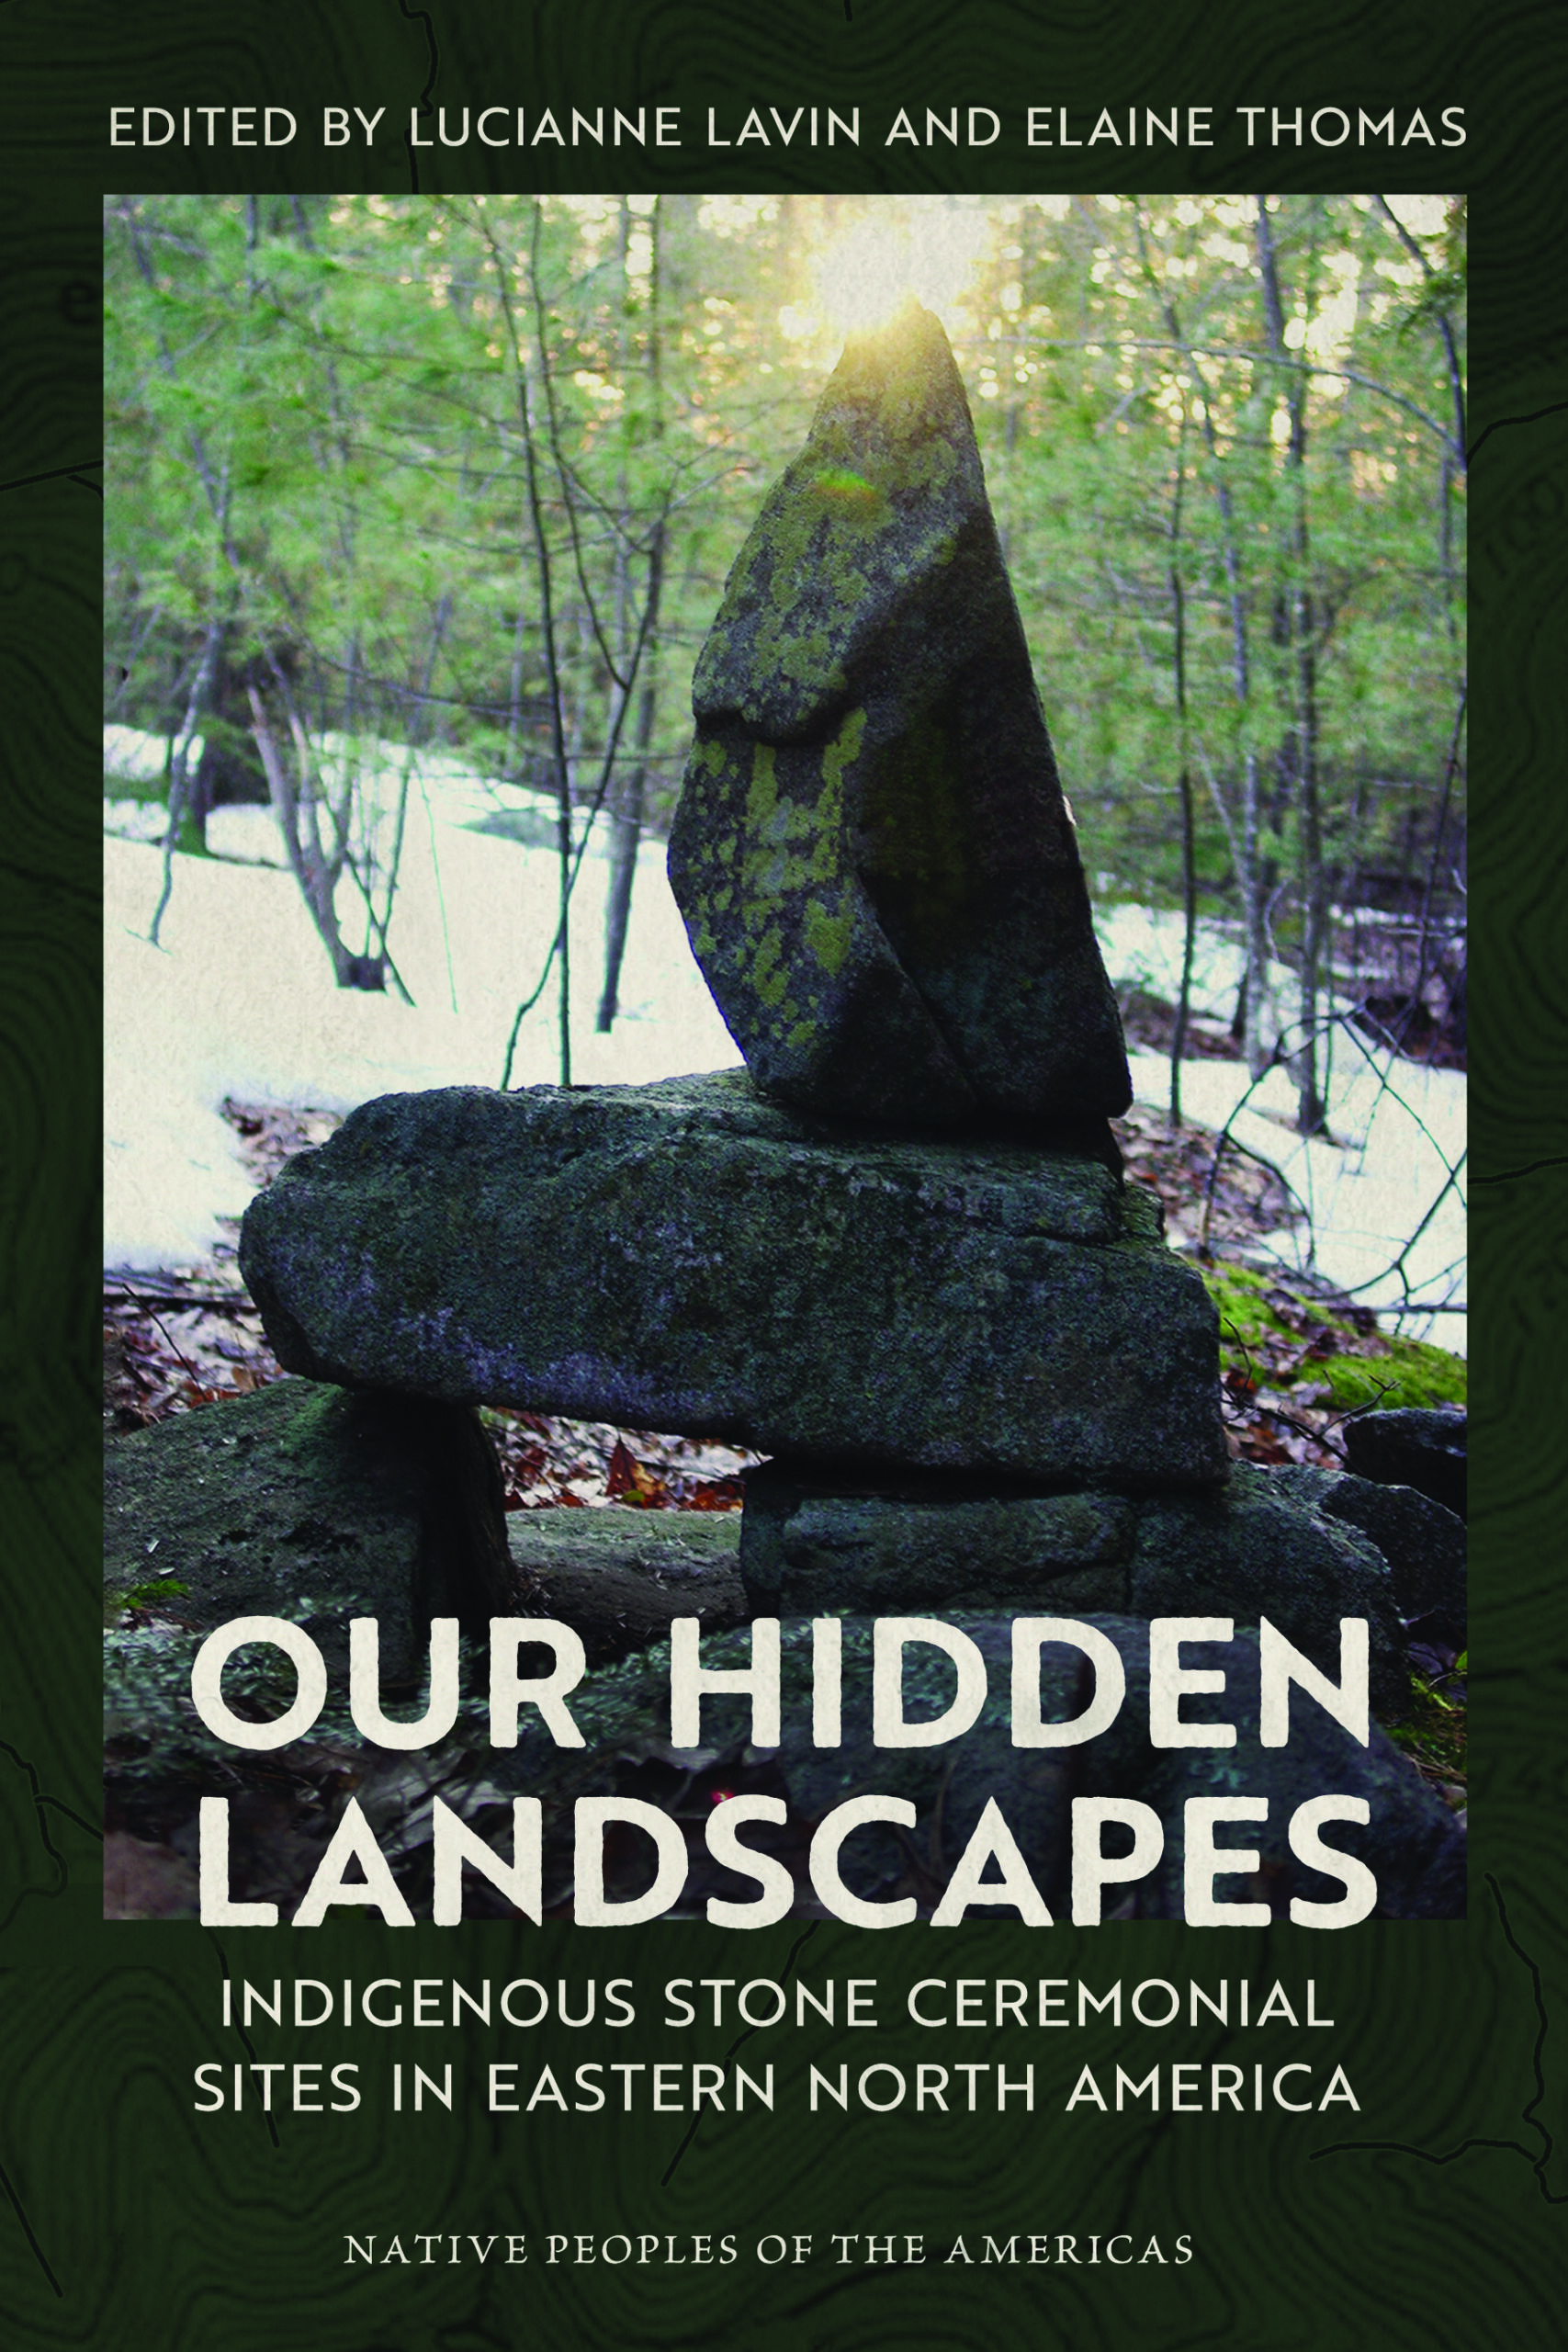 Cover of "Our Hidden Landscapes" by Dr. Lucianne Lavin